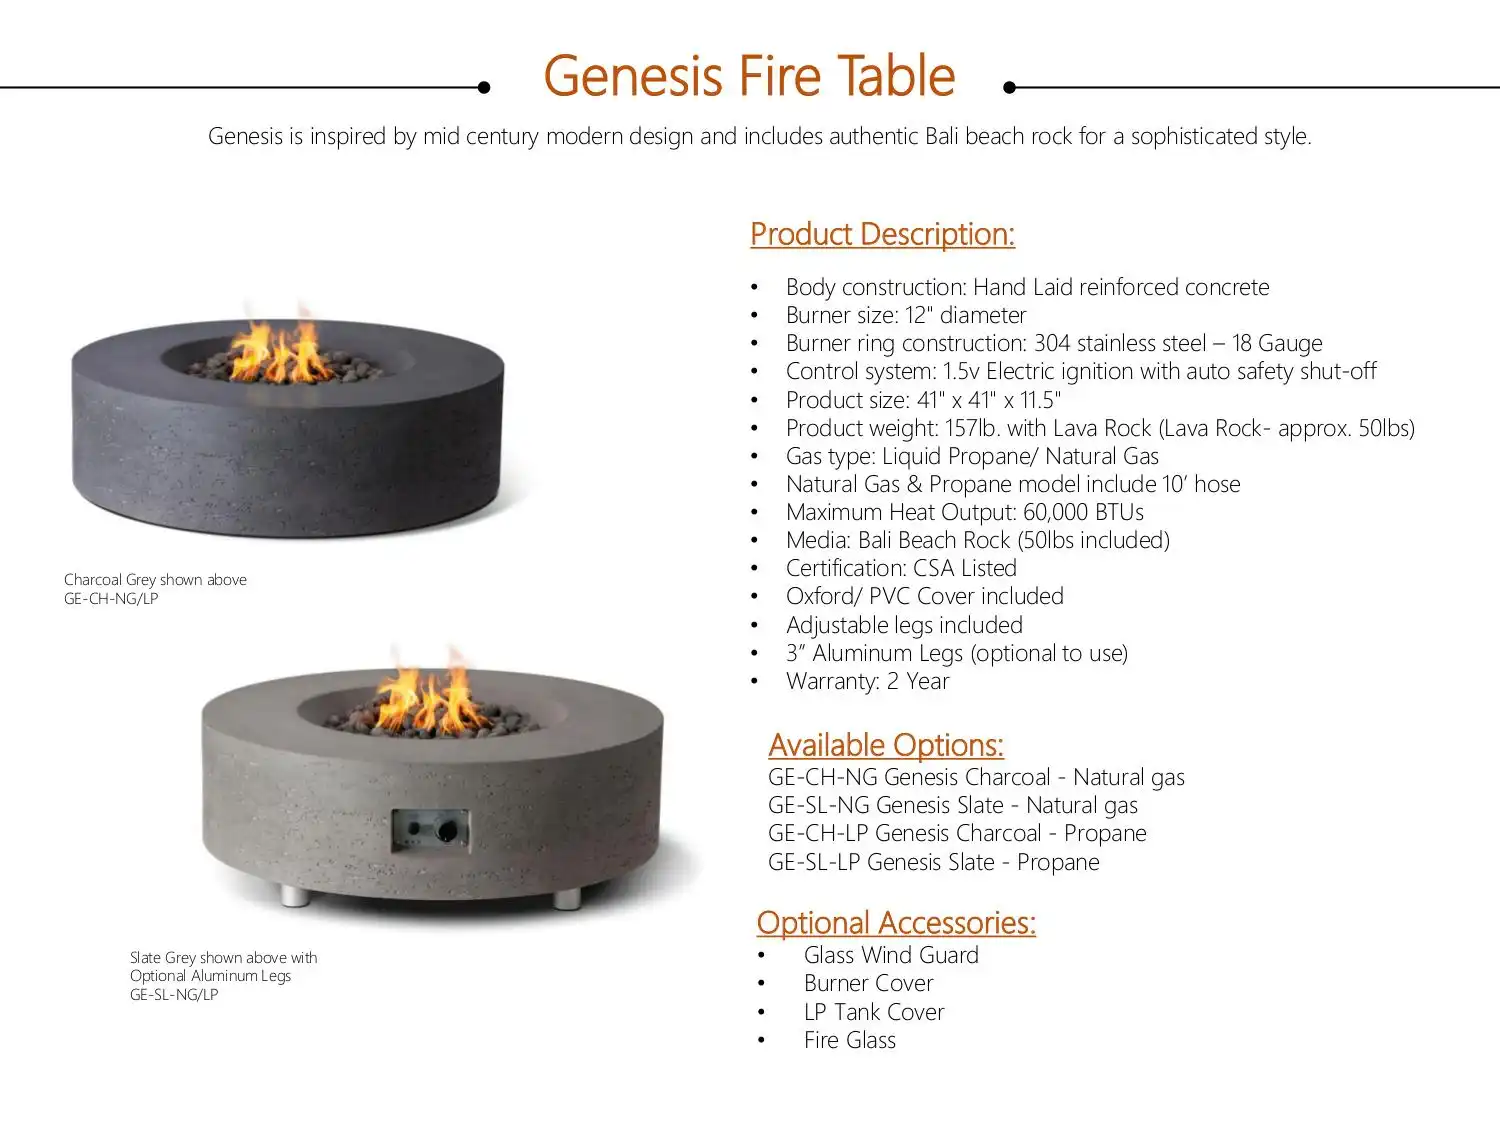 CL GENESIS FIRE TABLE C$ 2,300 by Pyromania